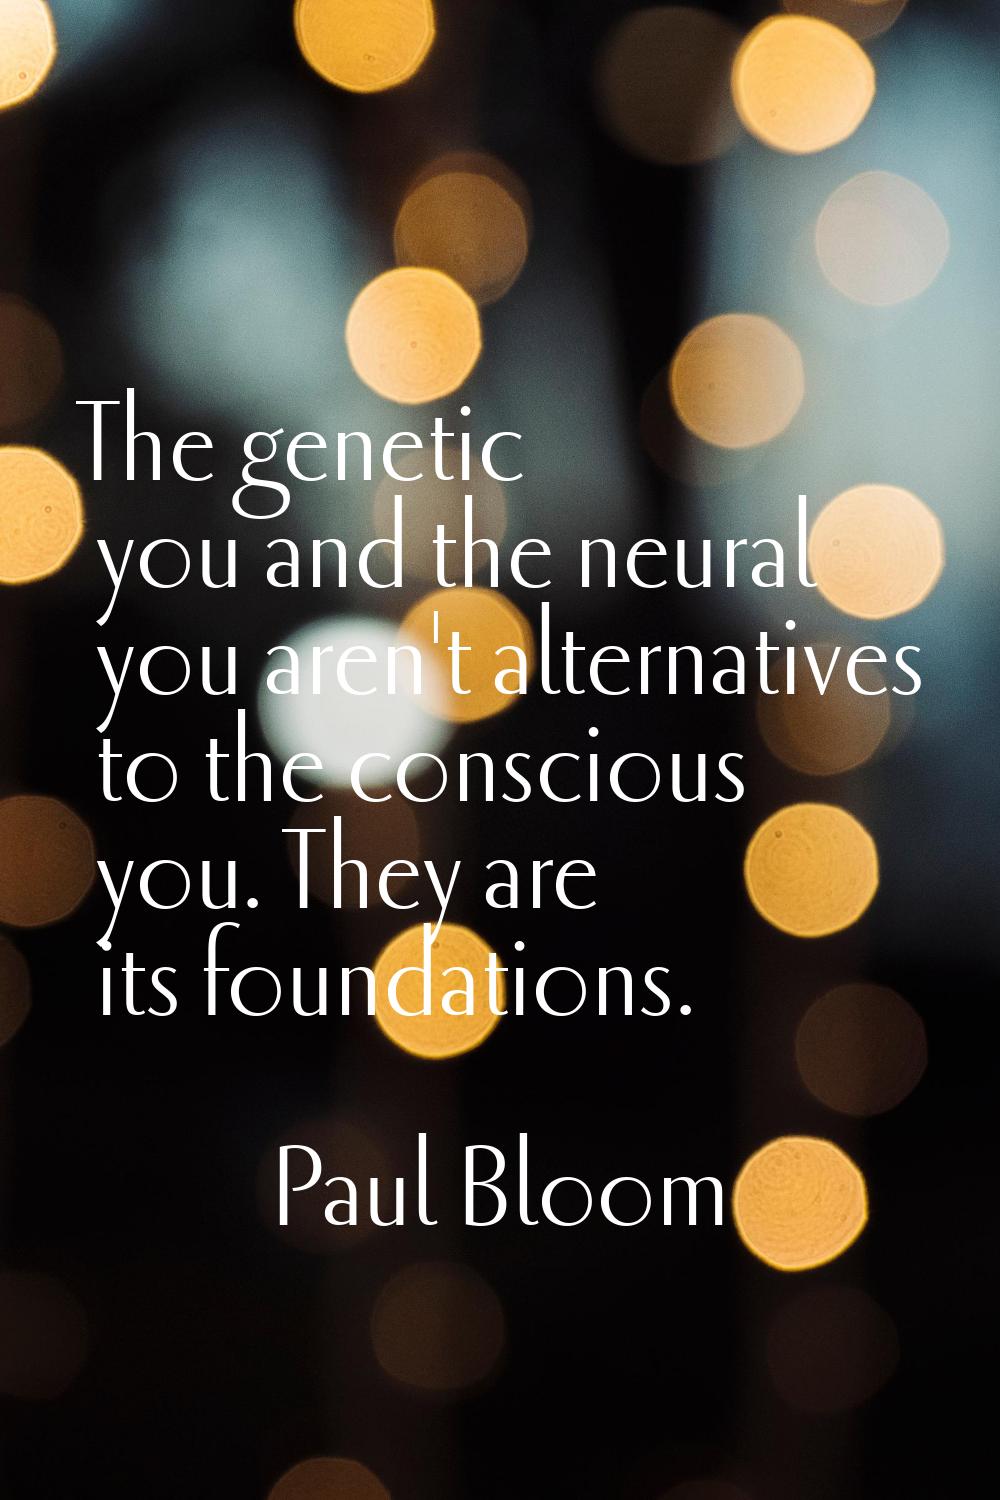 The genetic you and the neural you aren't alternatives to the conscious you. They are its foundatio